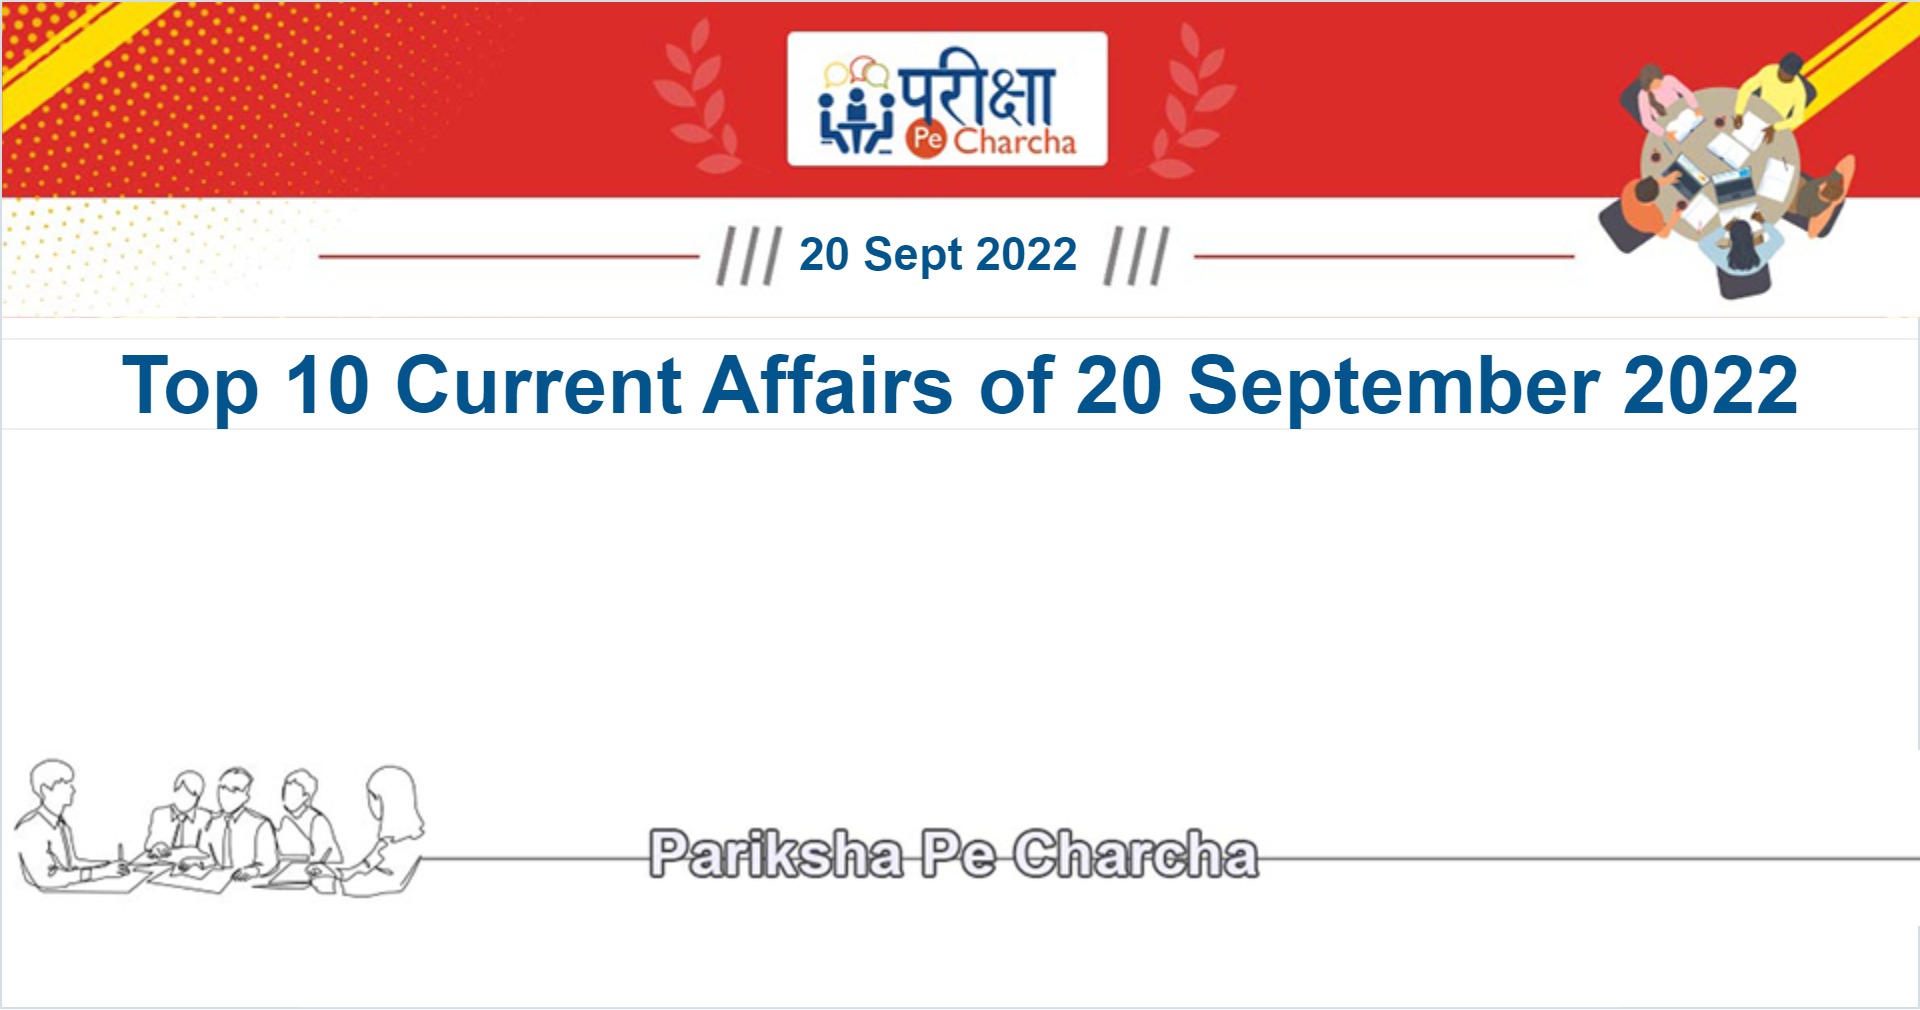 Current Affairs of 20 September 2022 in English and Hindi